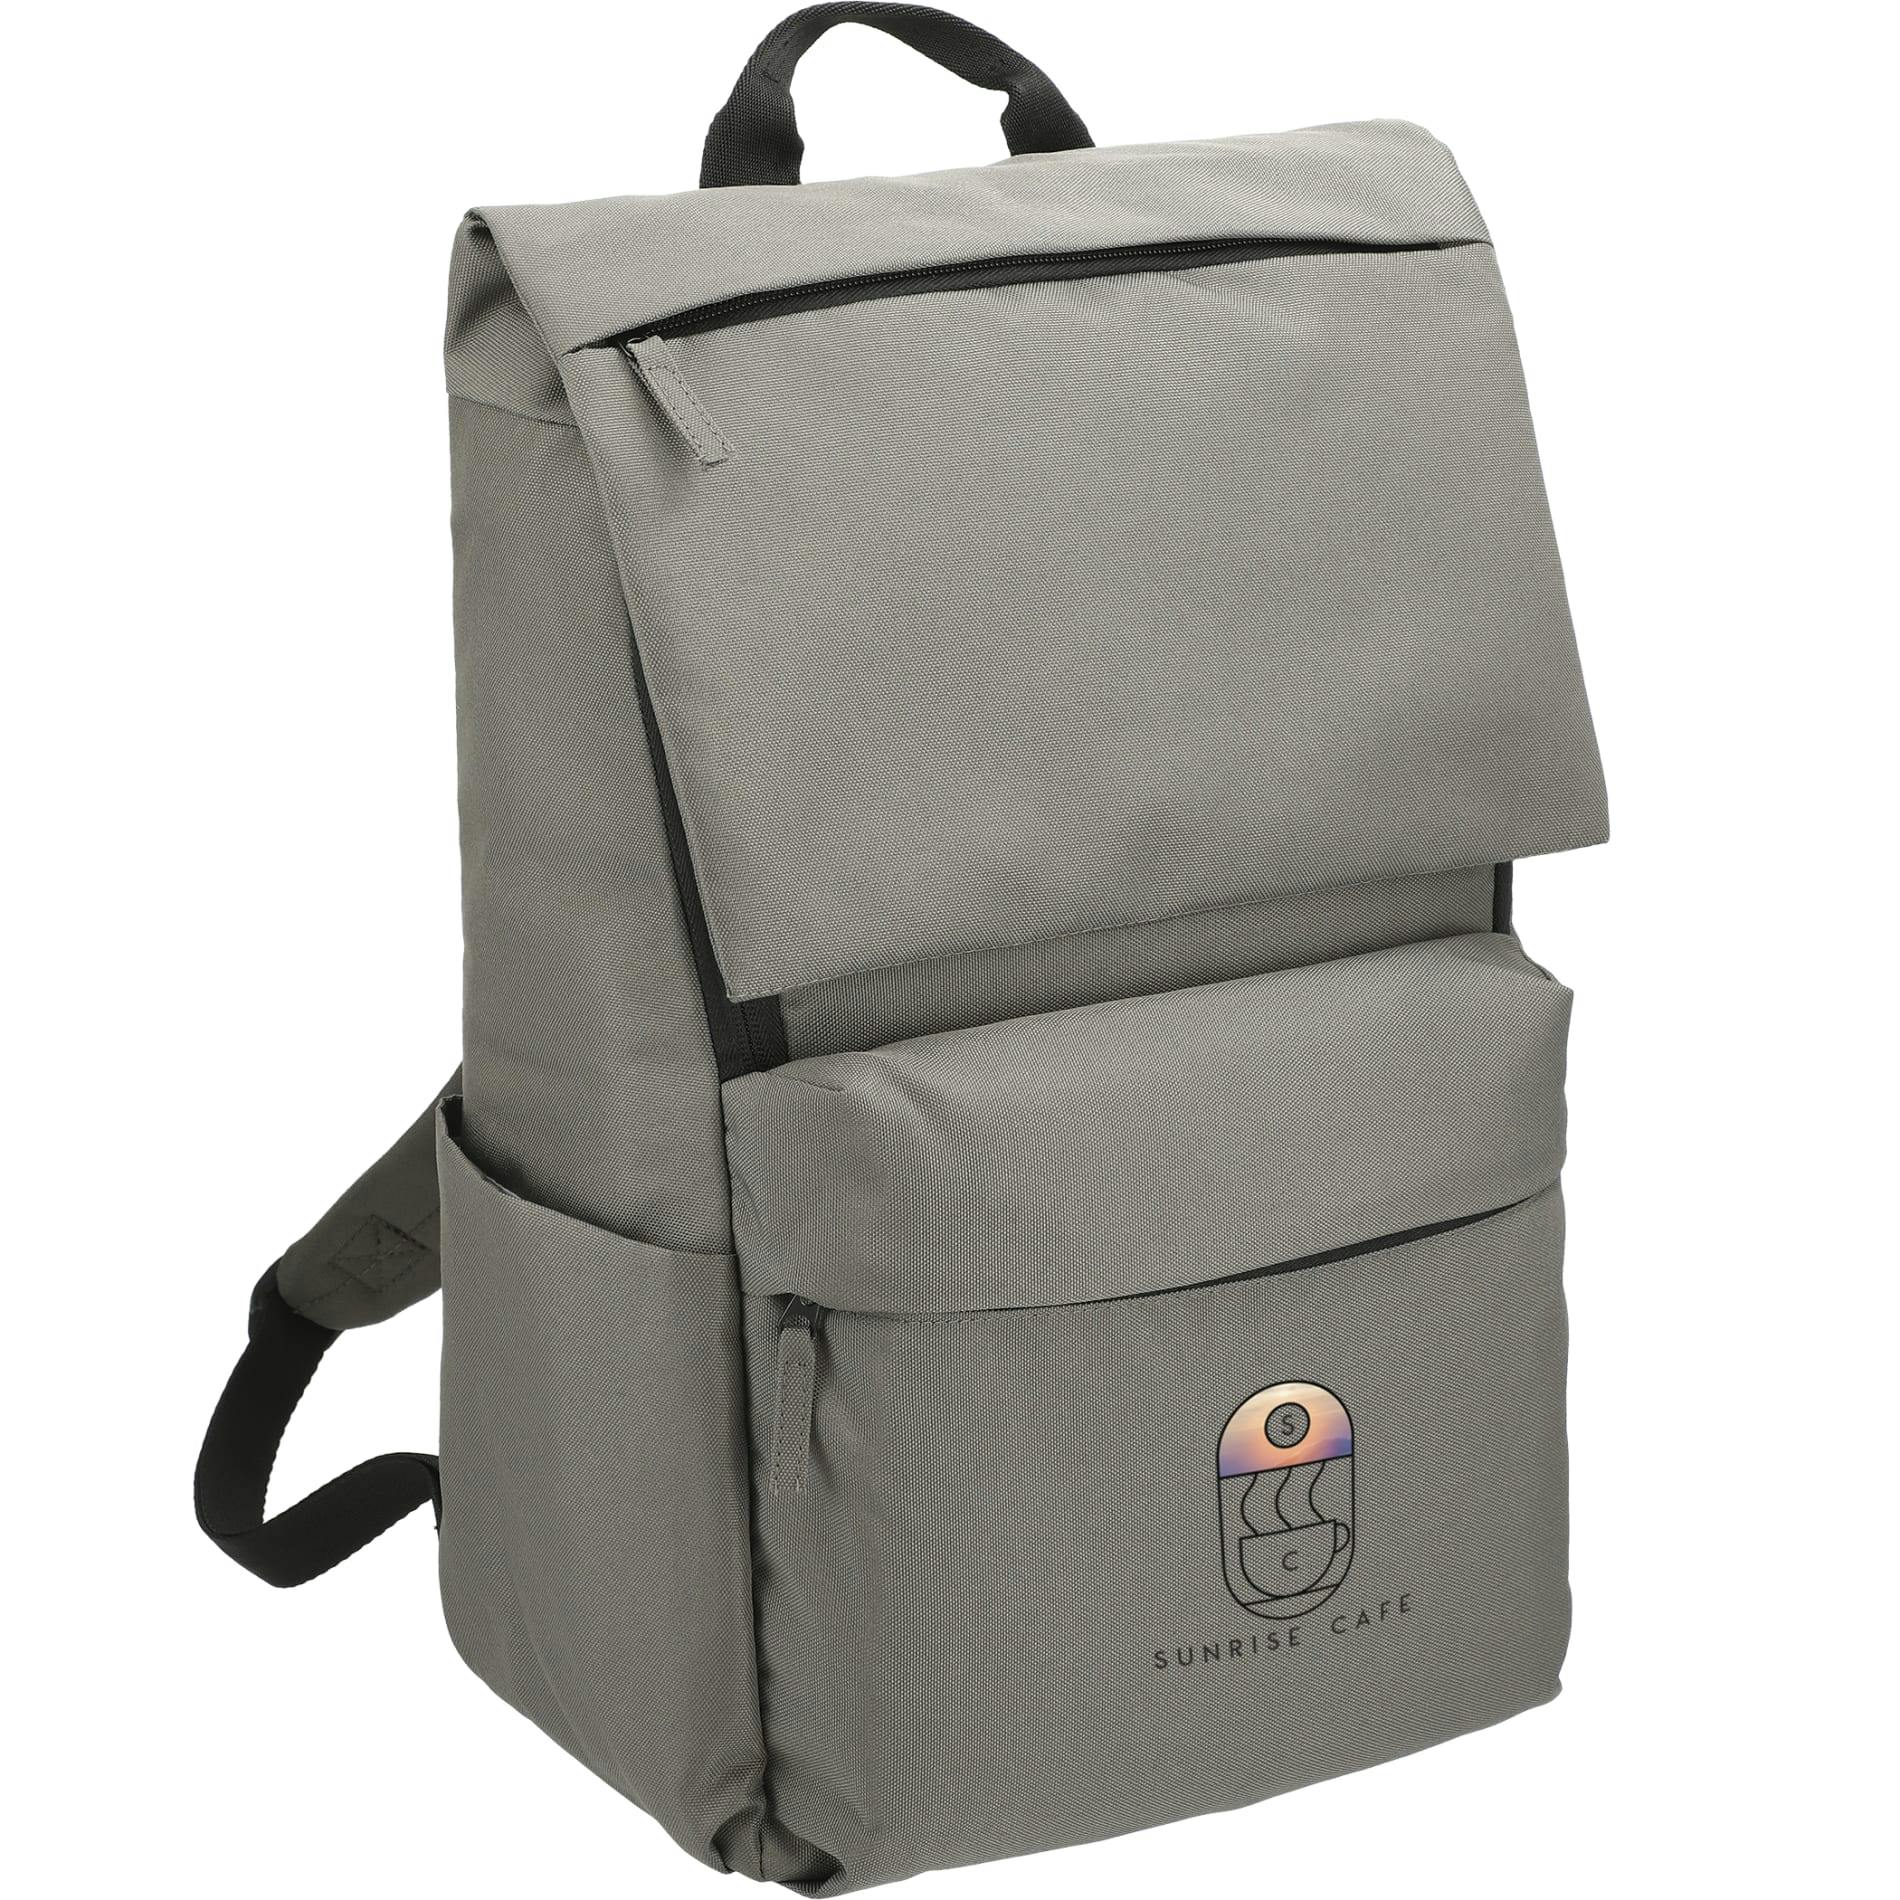 Merritt Recycled 15" Computer Backpack - additional Image 6